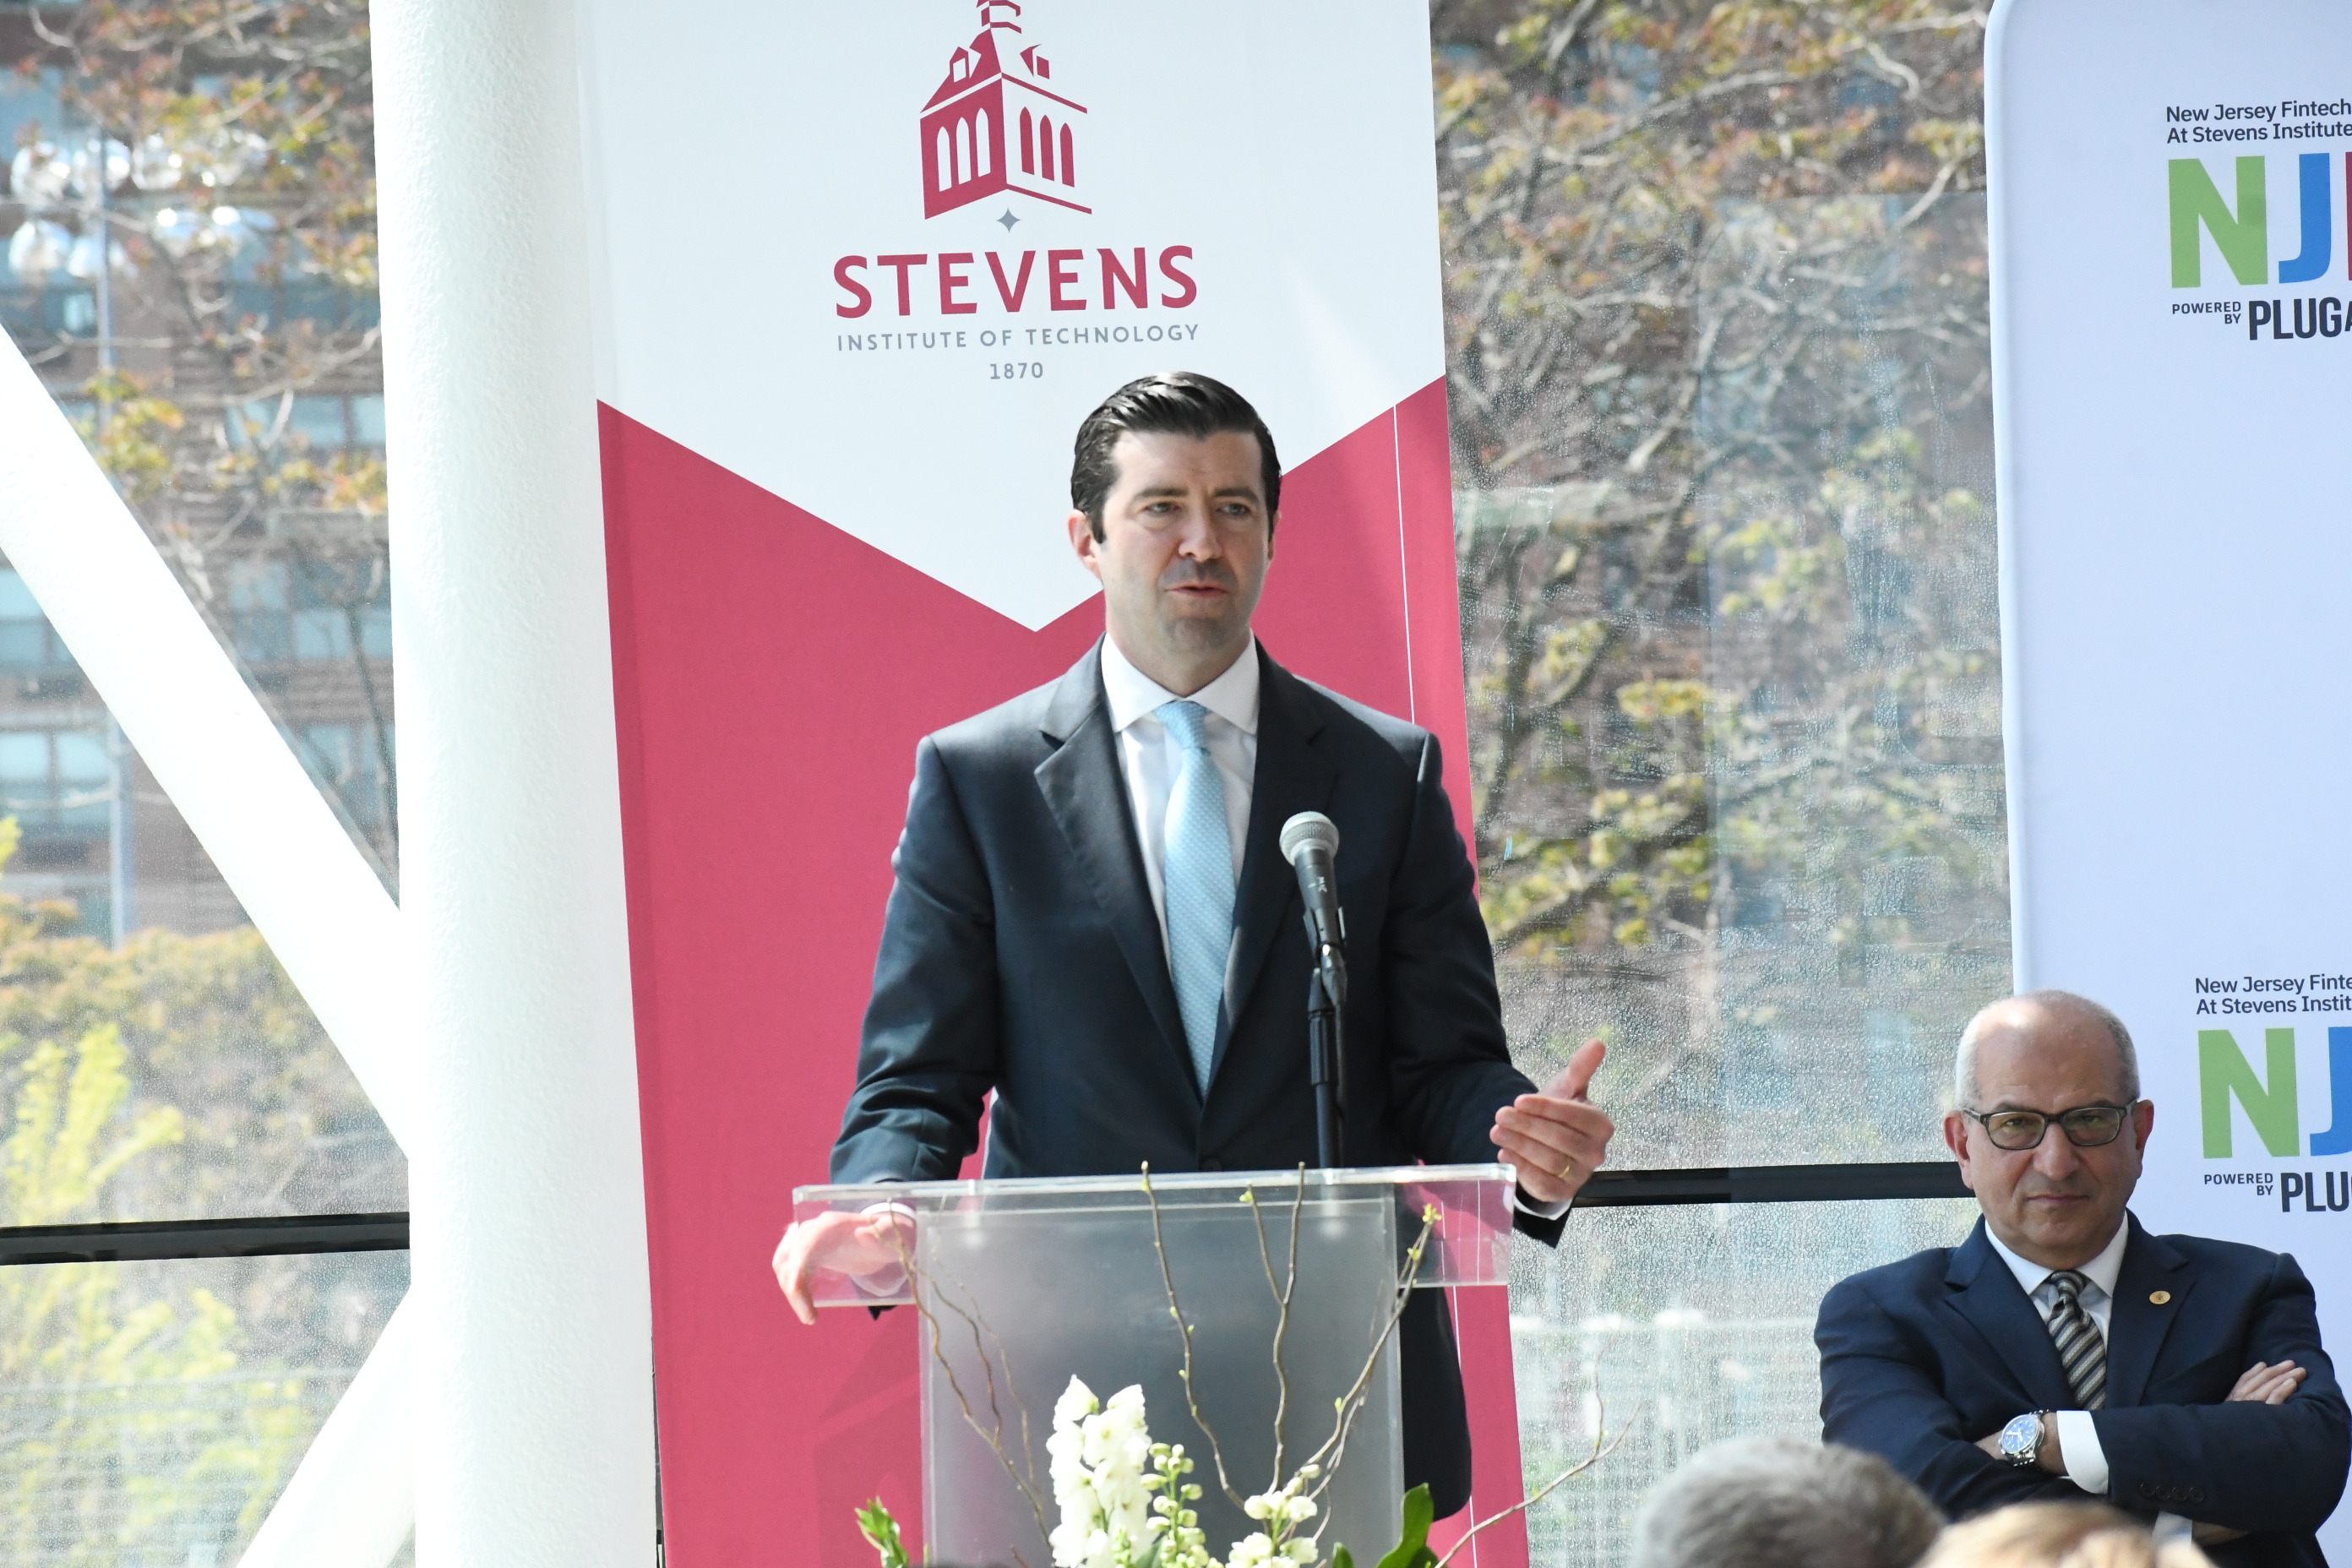 Gov. Phil Murphy, New Jersey Economic Development Authority Executive Director Tim Sullivan and other officials announce the launch of the New Jersey Fintech Accelerator at Stevens Institute of Technology (NJ FAST), which will serve as a hub for financial technology and insurance technology startups. Sullivan is seen discussing the program.